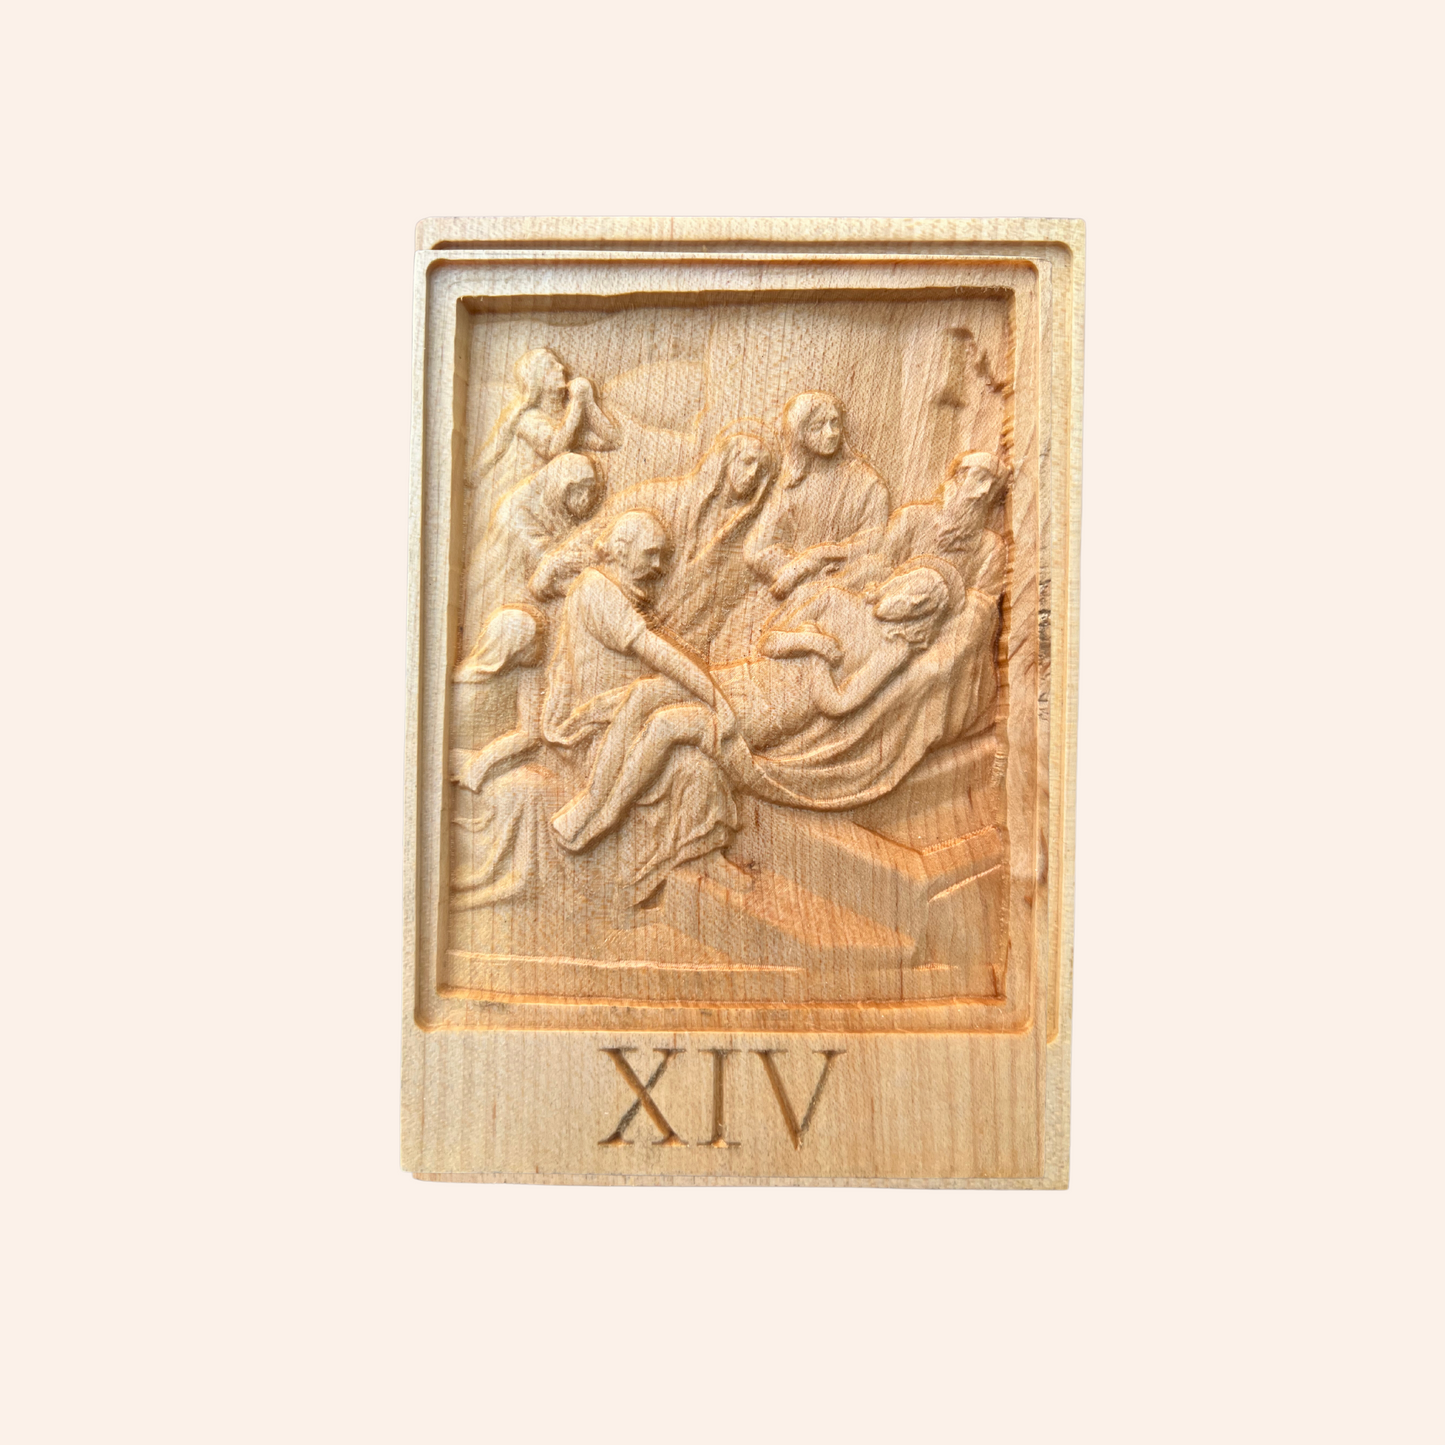 Set of 14 Stations of the Cross Wooden Engravings, Catholic Home Decor